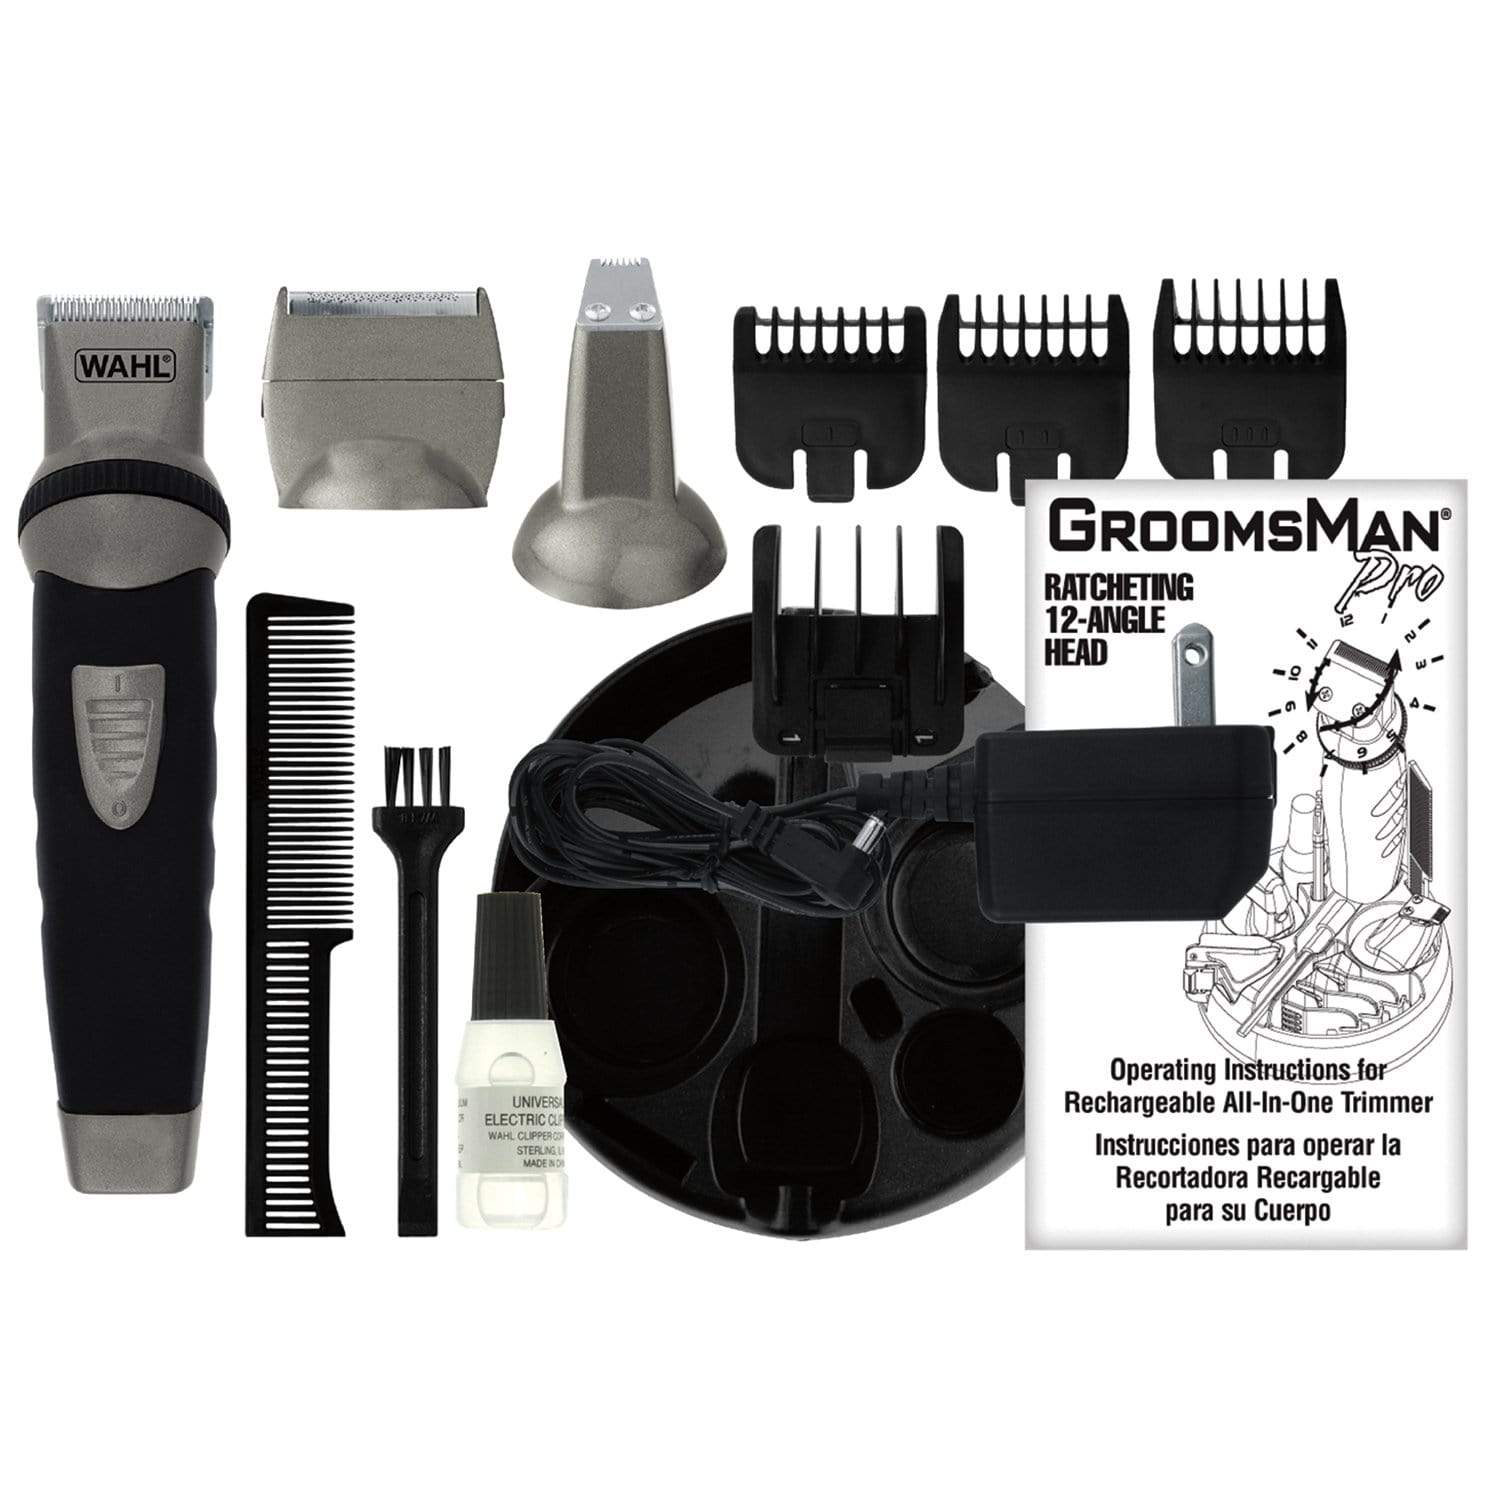 Wahl Groomsman Body - Rechargeable Cord/Cordless Beard Trimmer